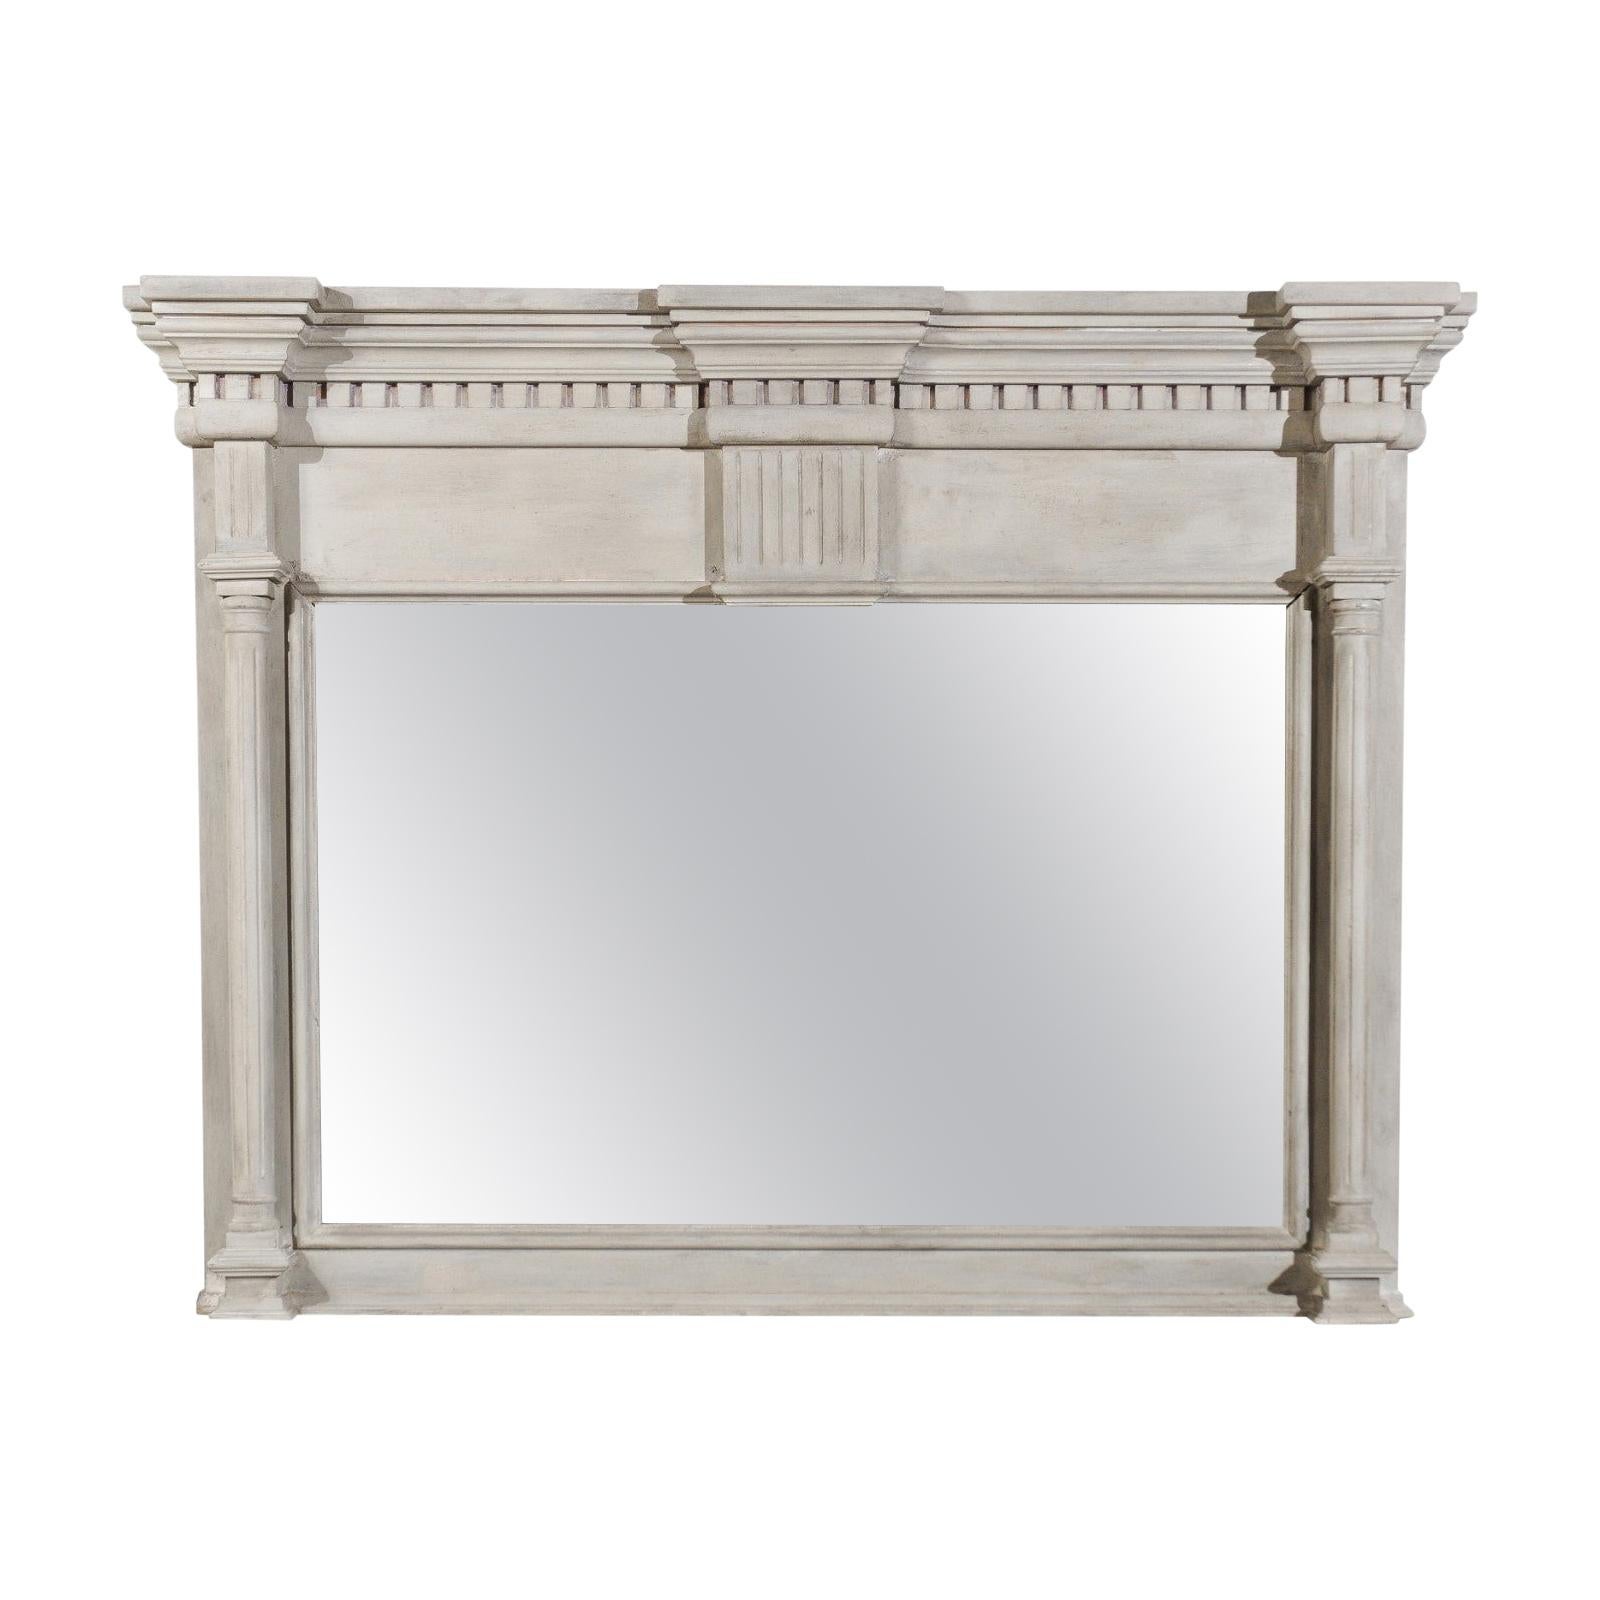 French 19th Century Neoclassical Style Architectural Element Made into a Mirror